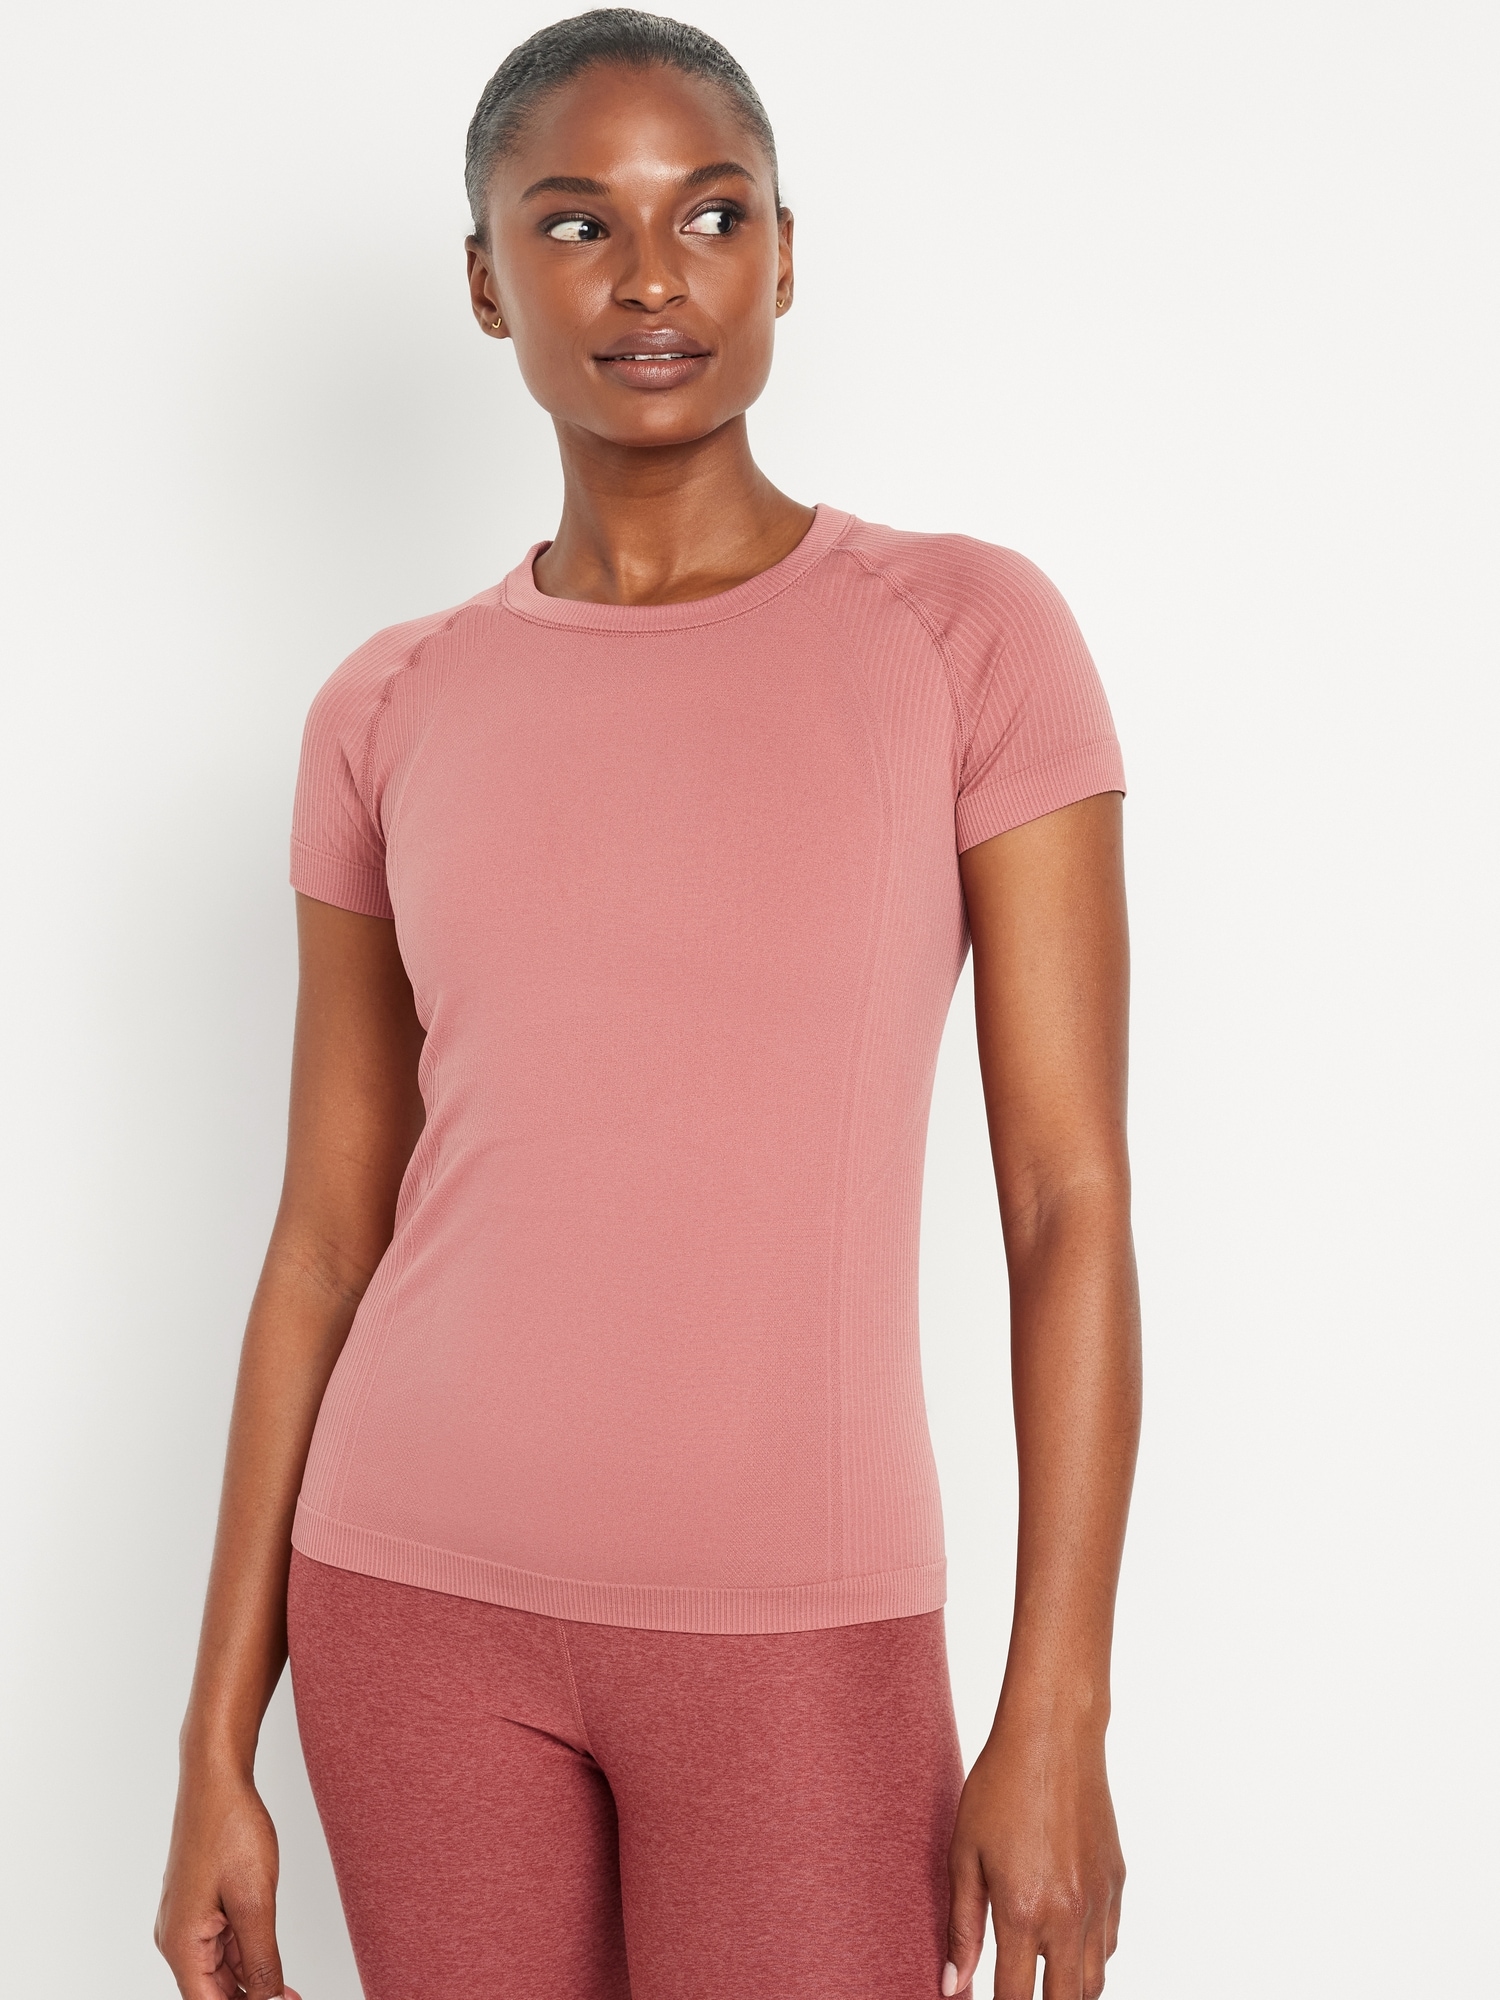 Women's Activewear Tops Tagged Activewear Tops - Old Navy